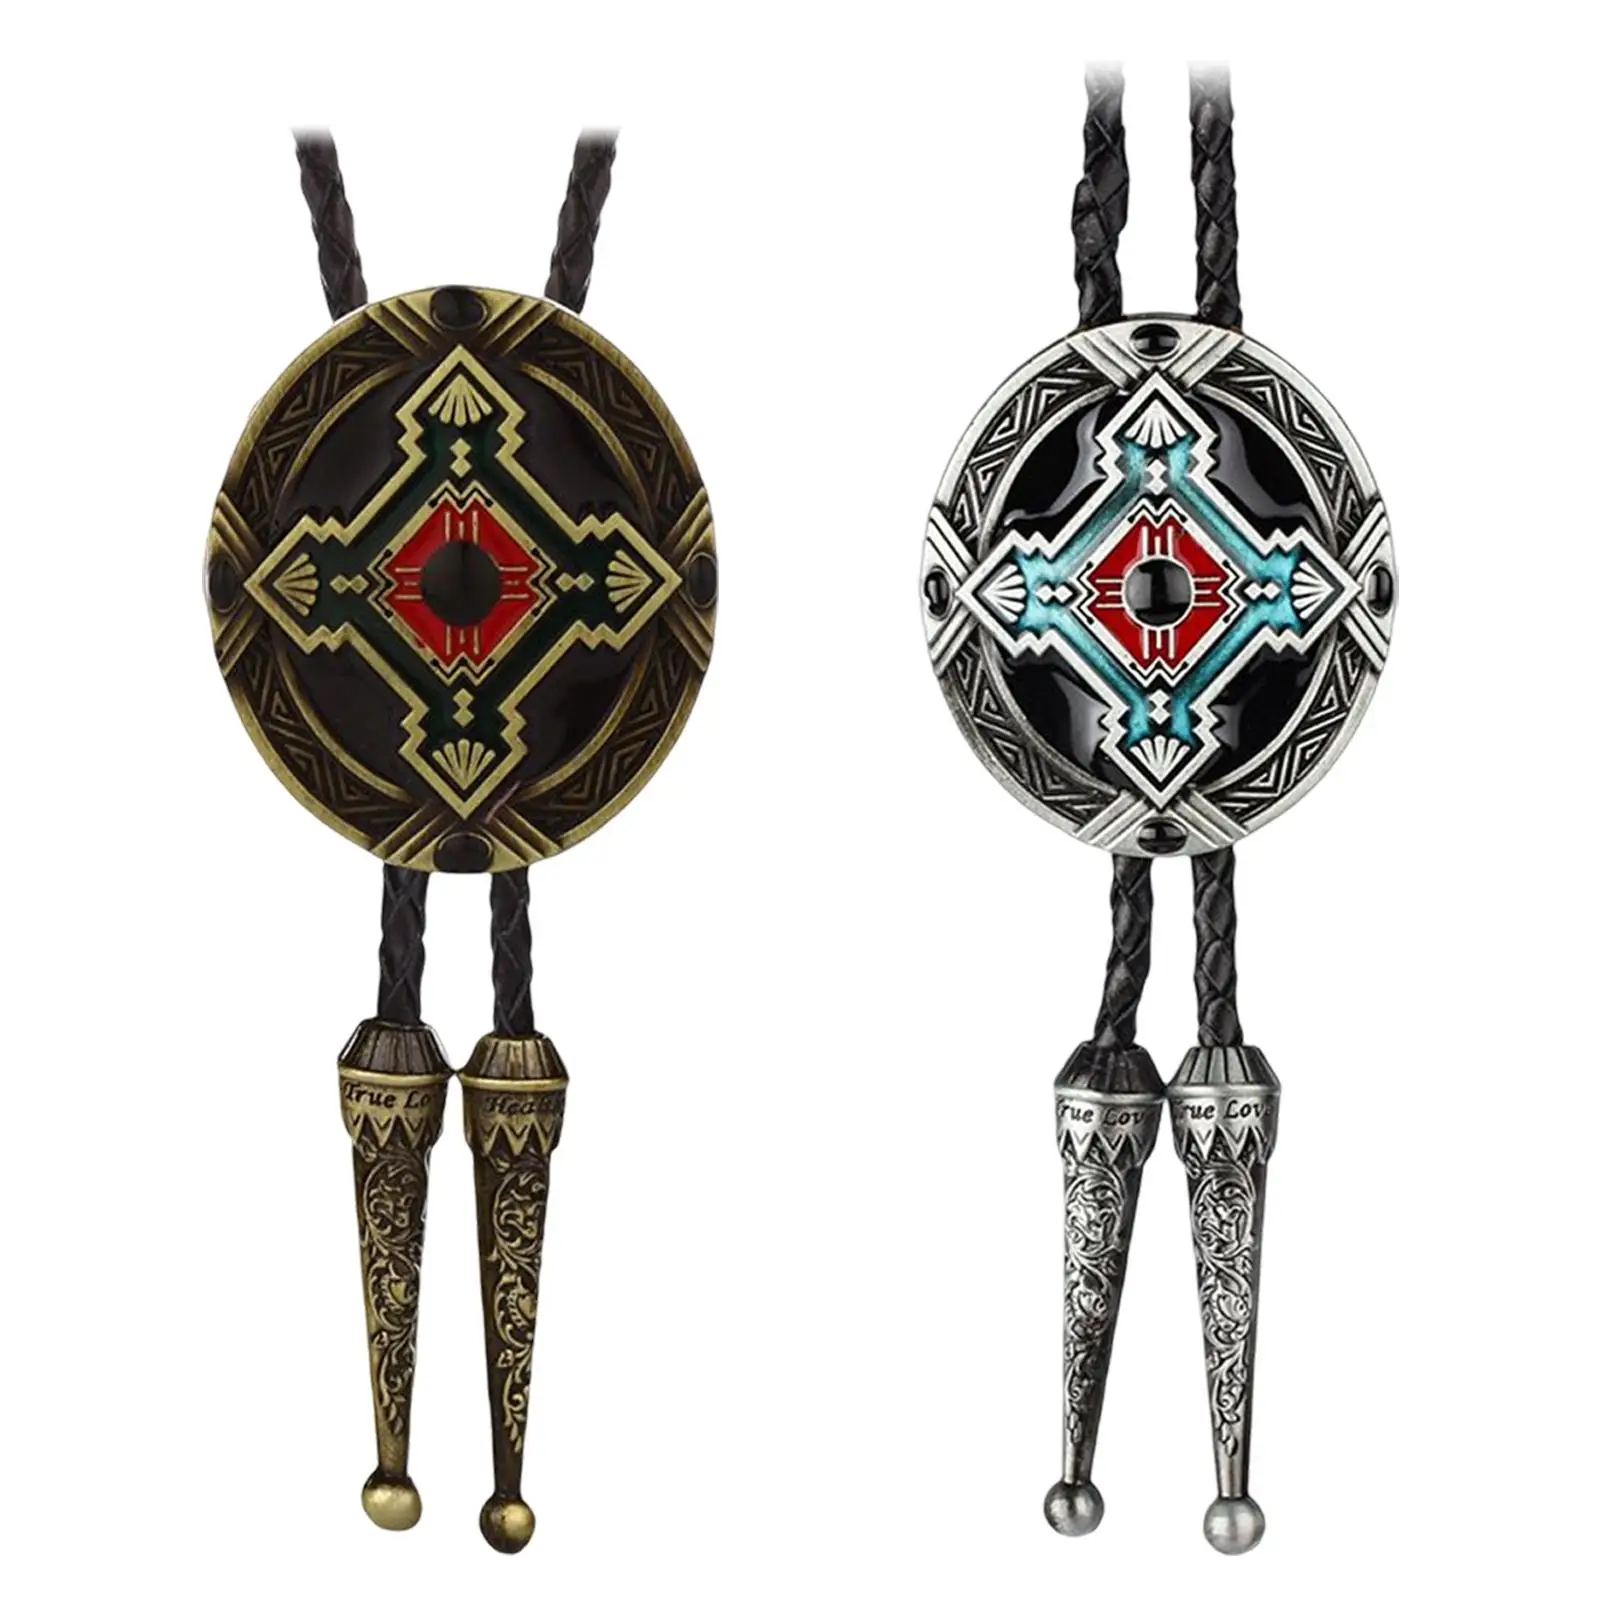 Bolo Tie Western Cowboy Pendant Leather  Special Apparel Accessory for Men Jewelry Durable Unisex Oval Shape Rope Length 100cm